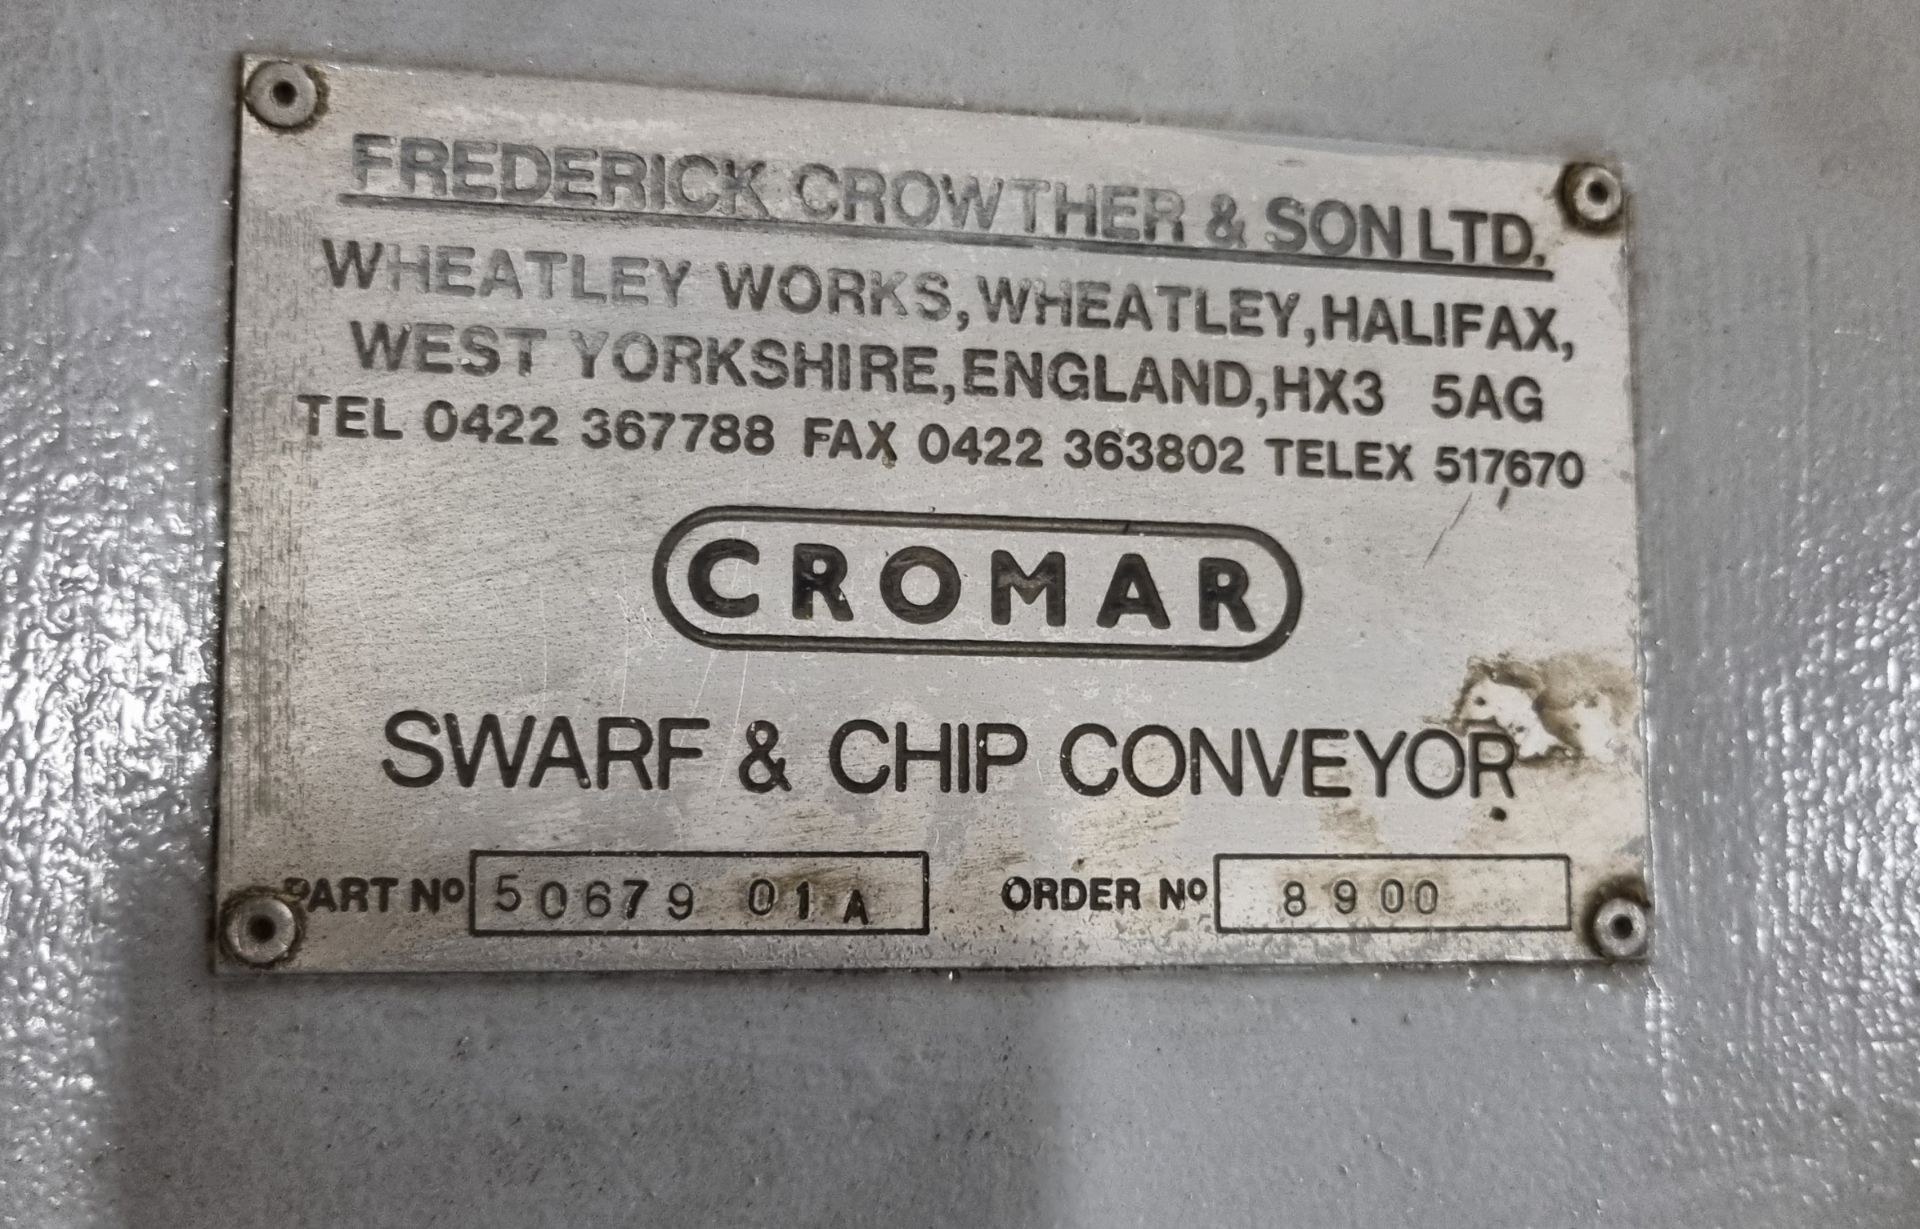 Harrison VHS 450 gap bed lathe with Cromar swarf & chip conveyor - see pictures for tooling - Image 15 of 17